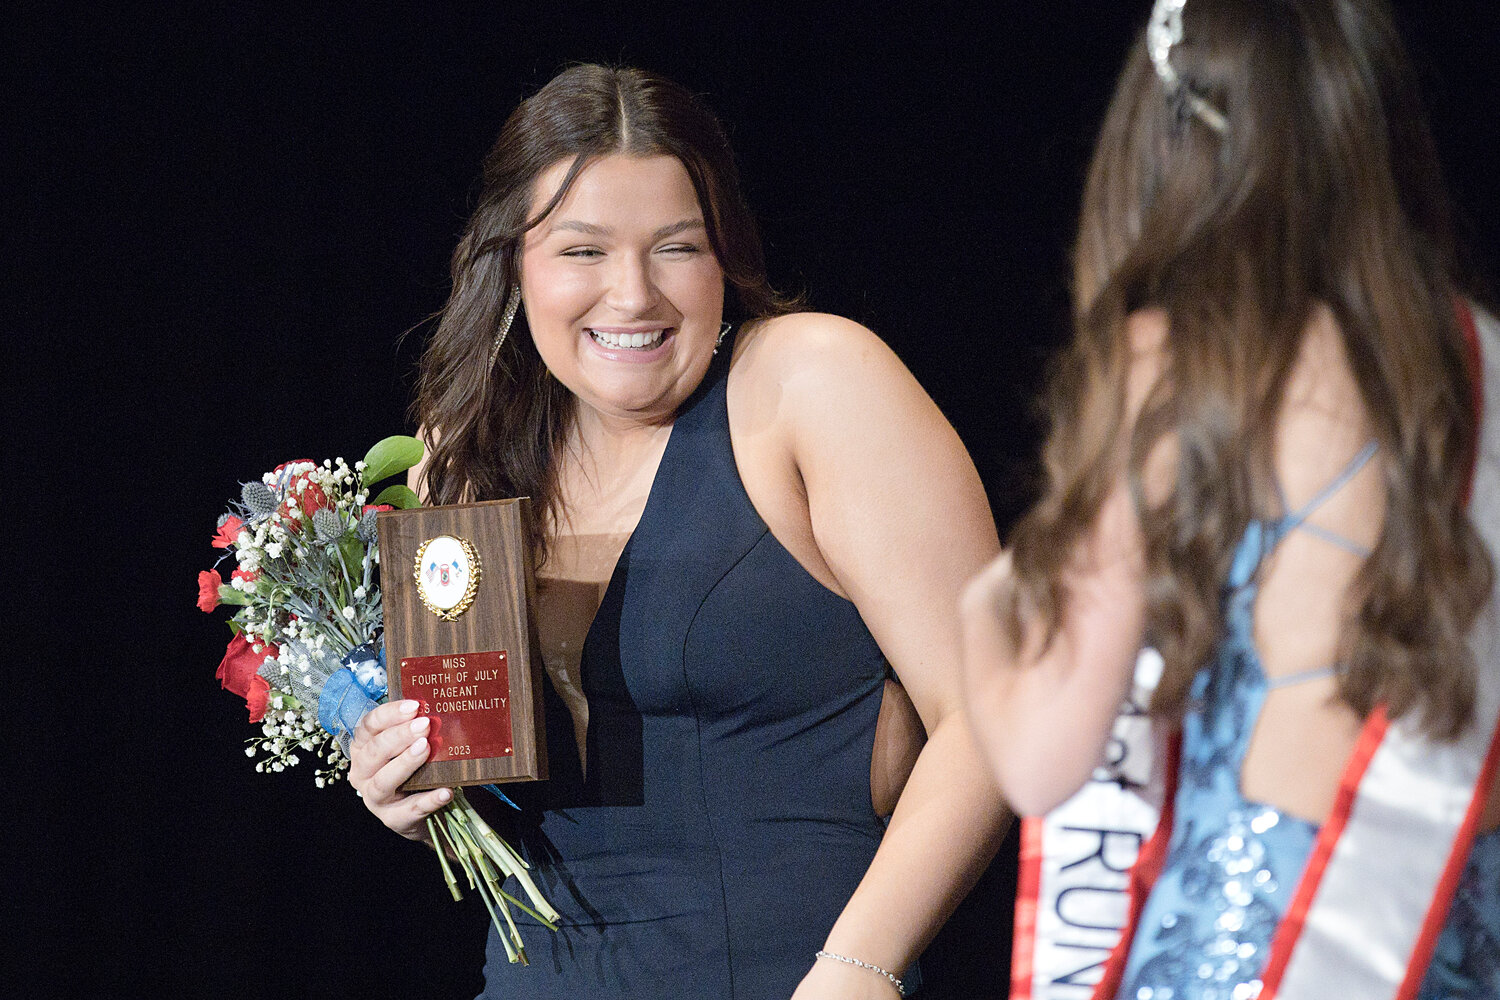 Mia Padula is congratulated after being named Miss Congeniality and first runner-up in the 75th annual Miss Fourth of July Pageant Saturday.